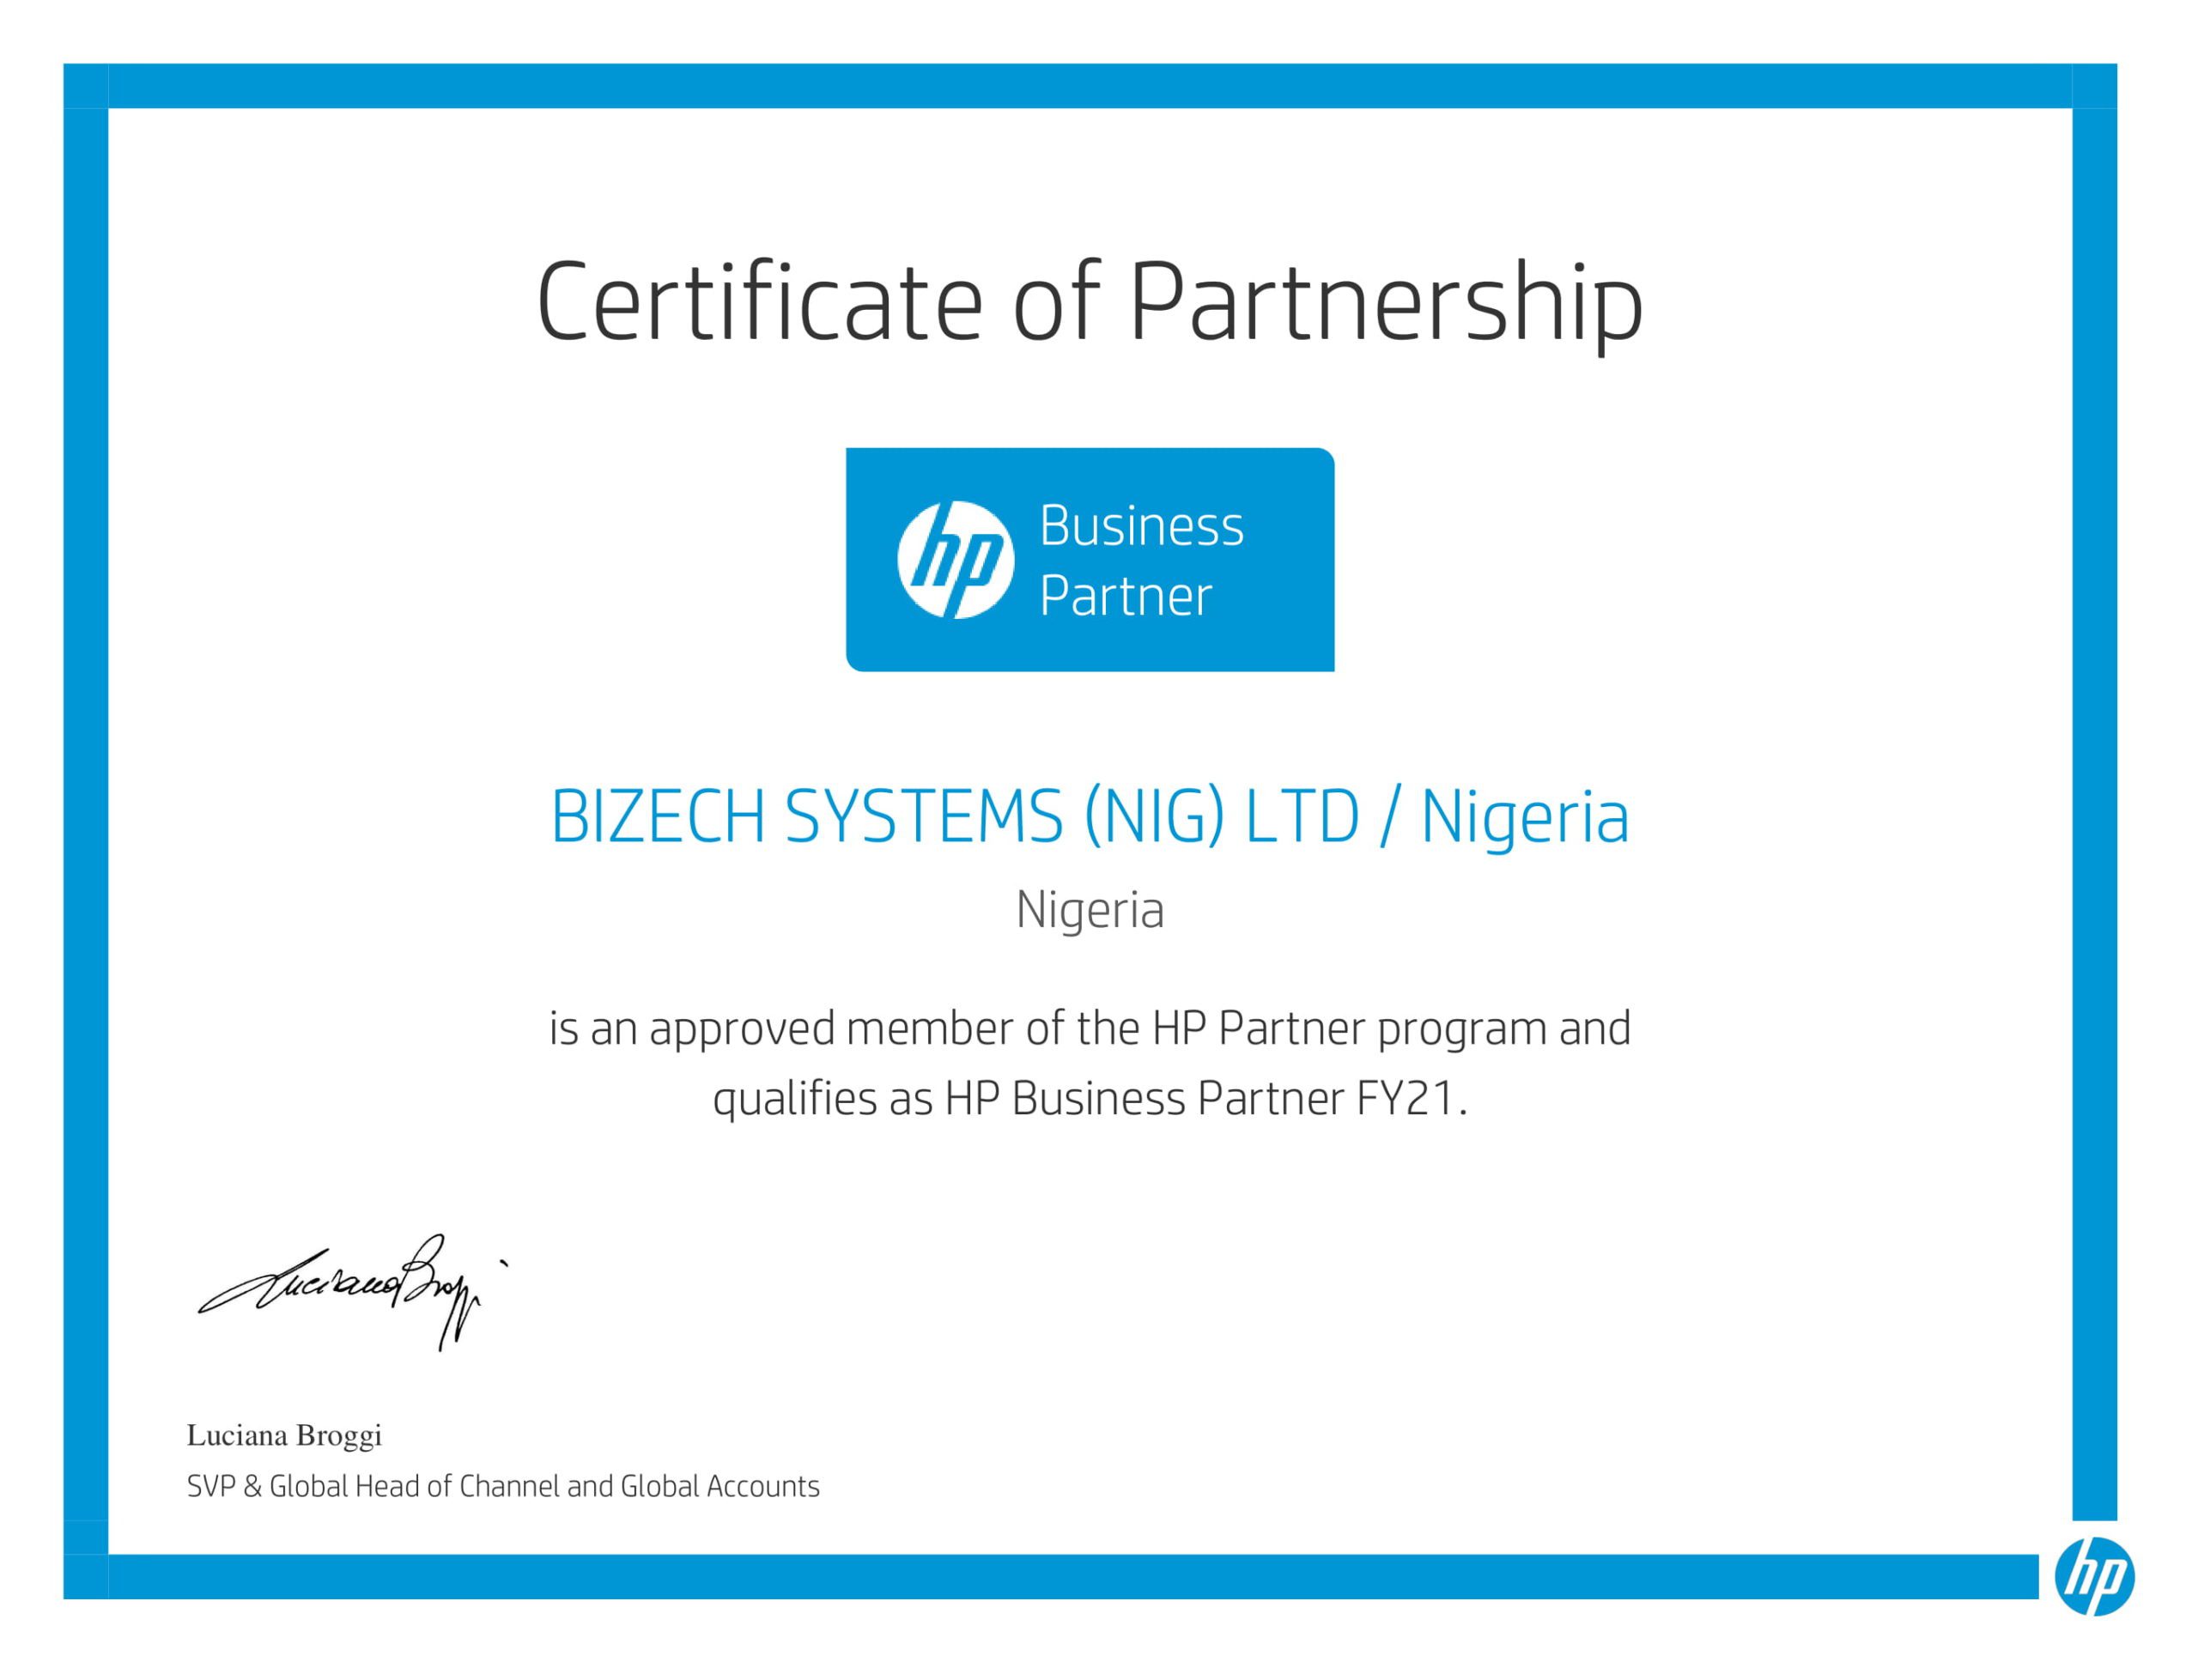 Certificate of Business Partnership